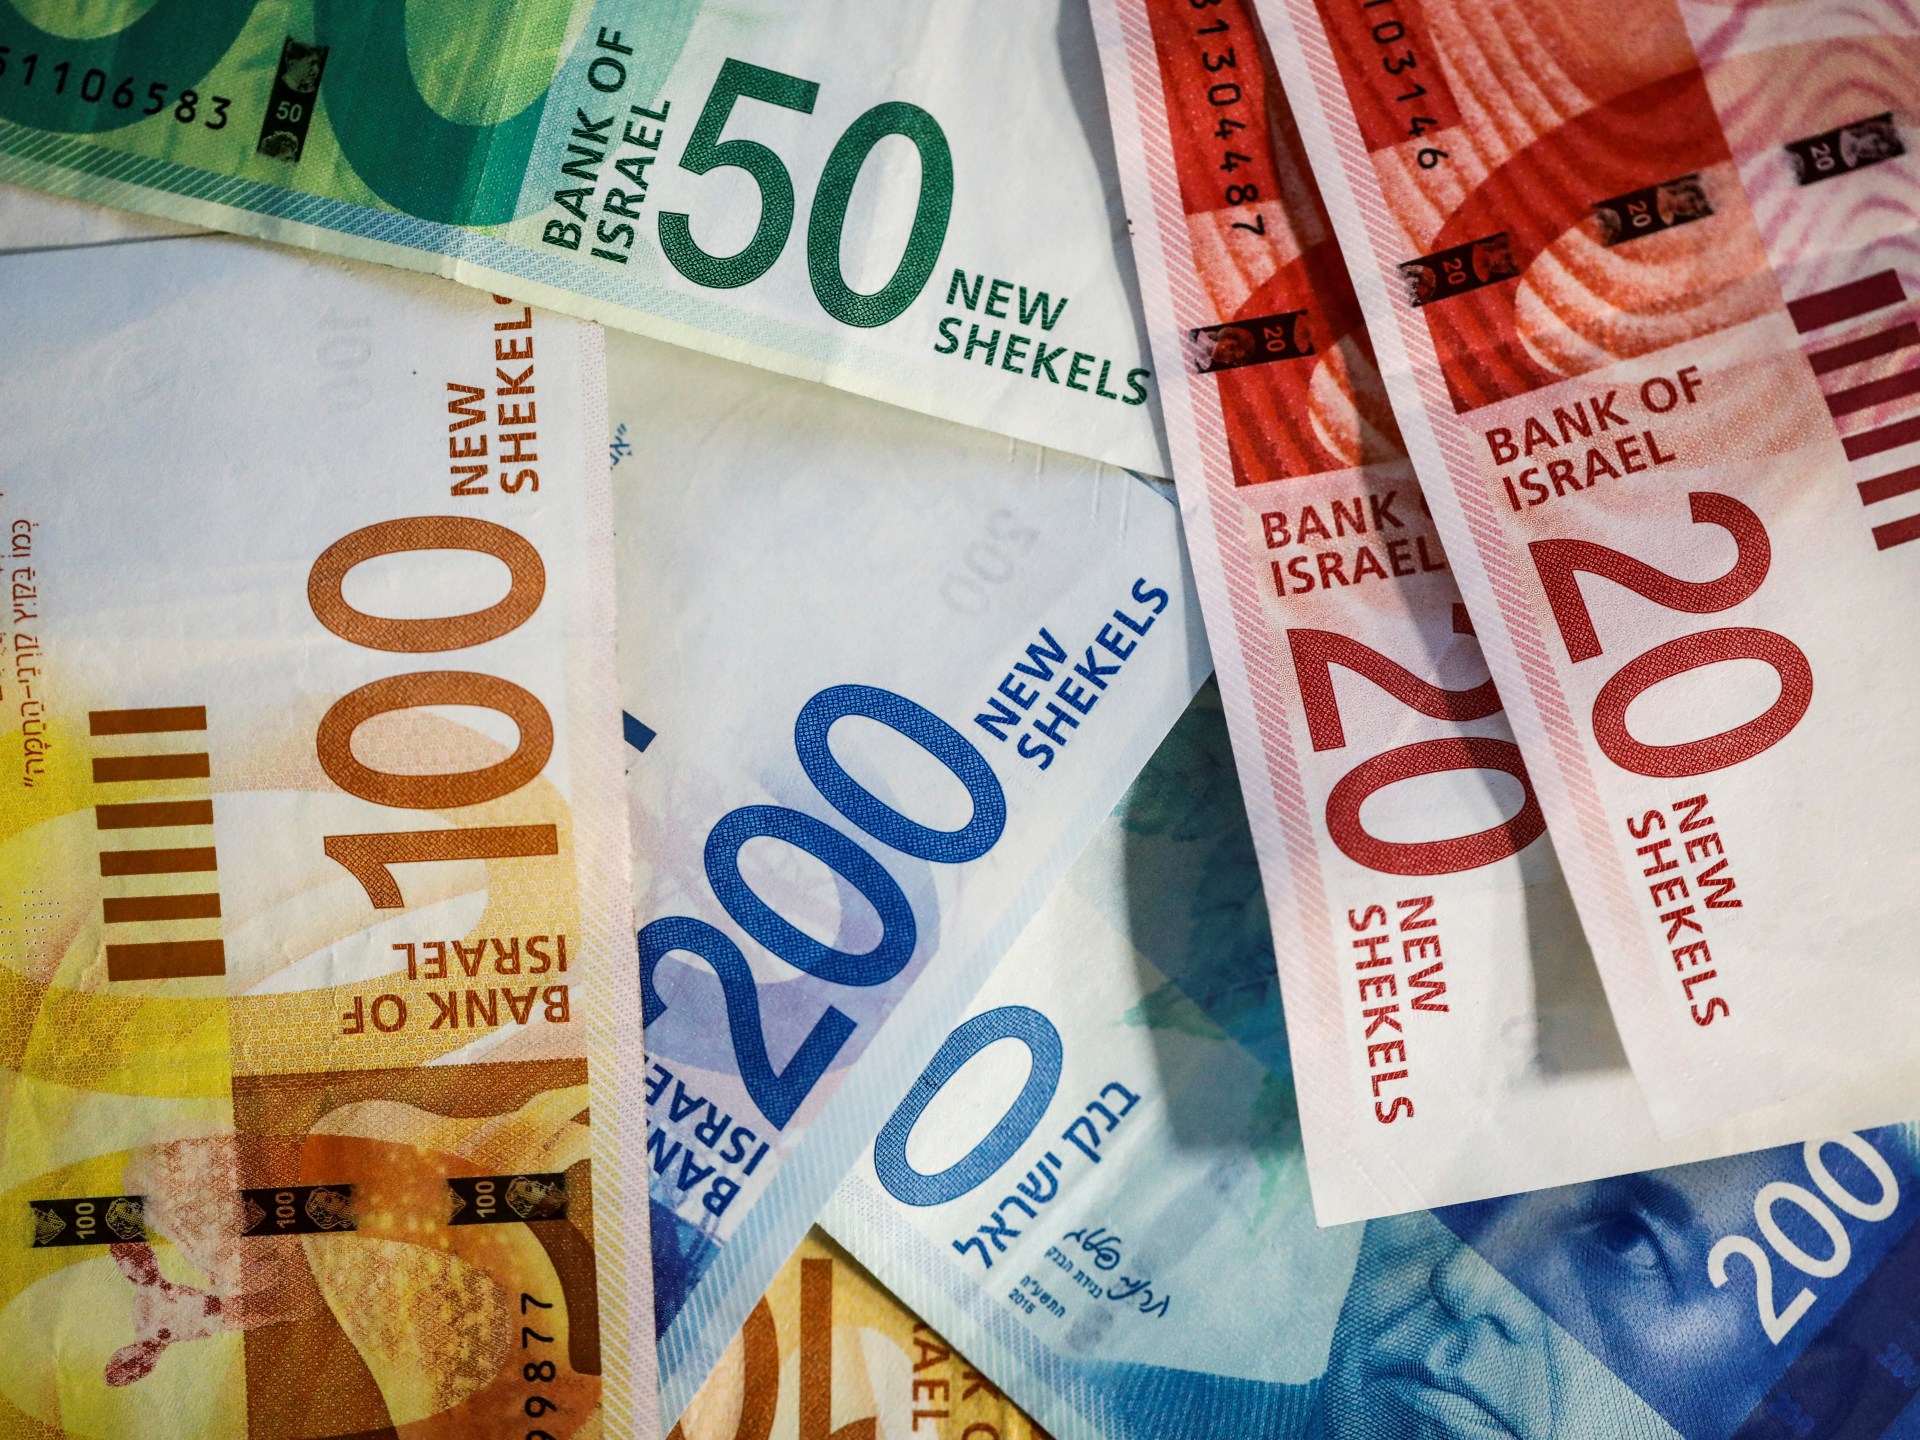 Bank of Israel to sell $30bn of forex after shekel falls | Israel-Palestine conflict